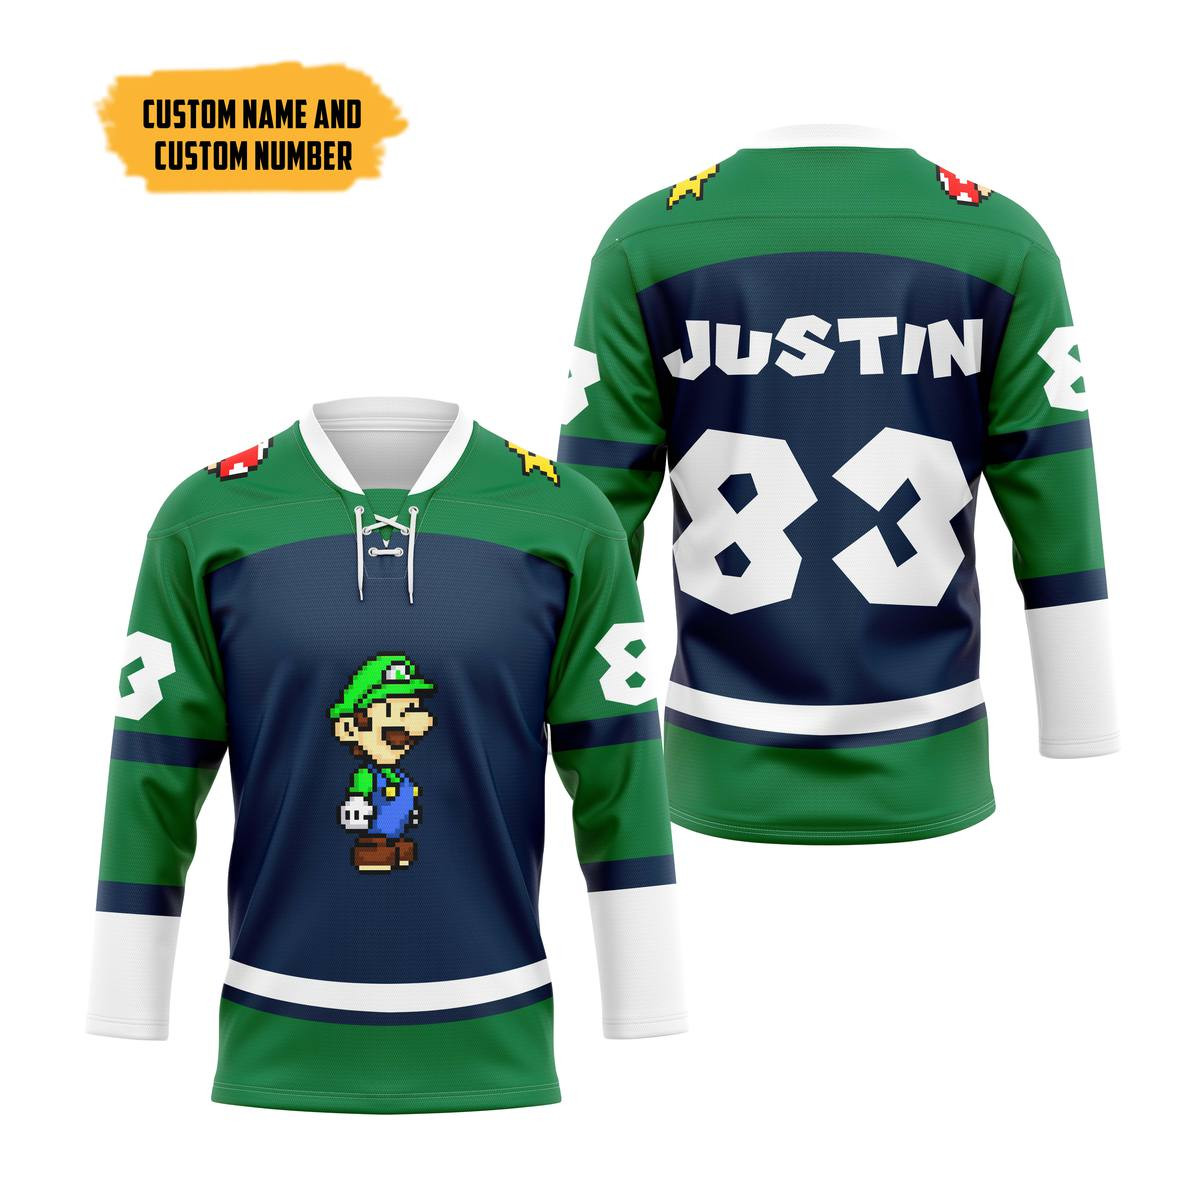 The Best Hockey Jersey Shirt in 2022 273